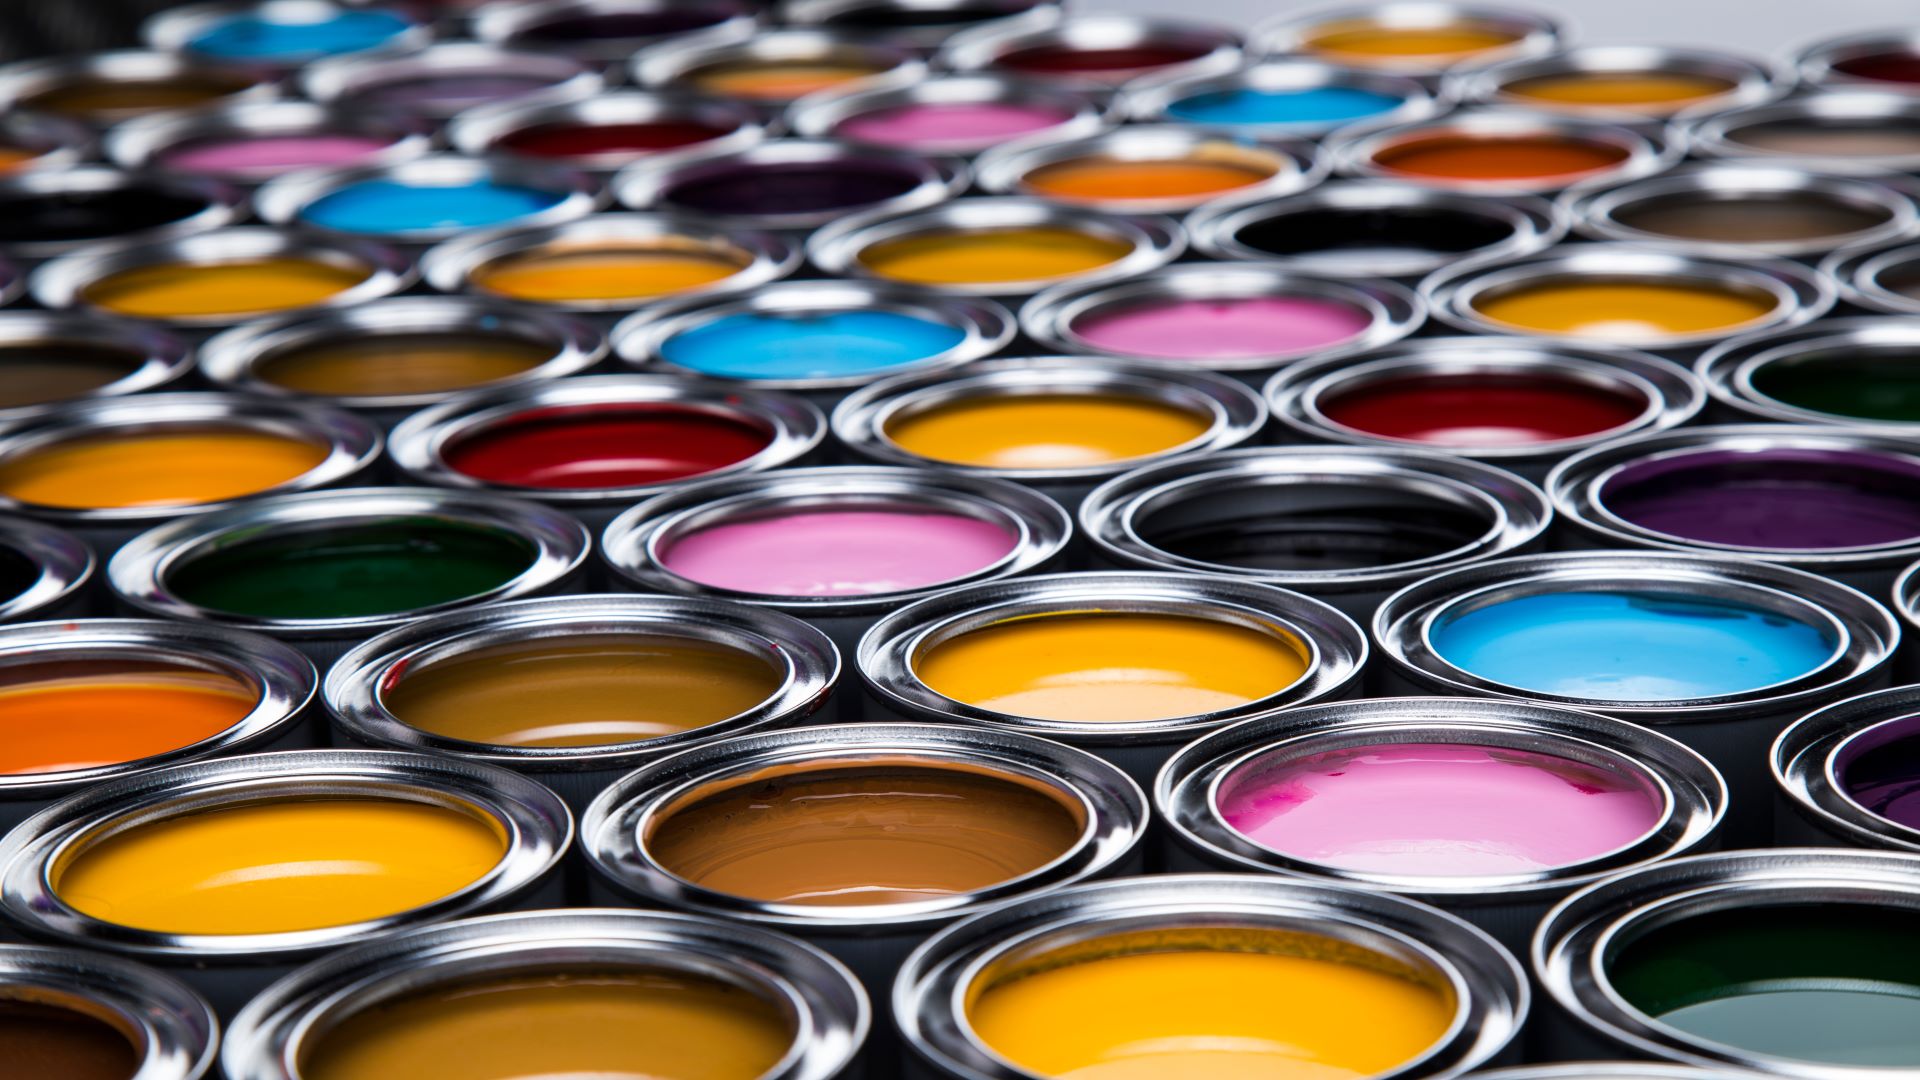 A circular economy for paints